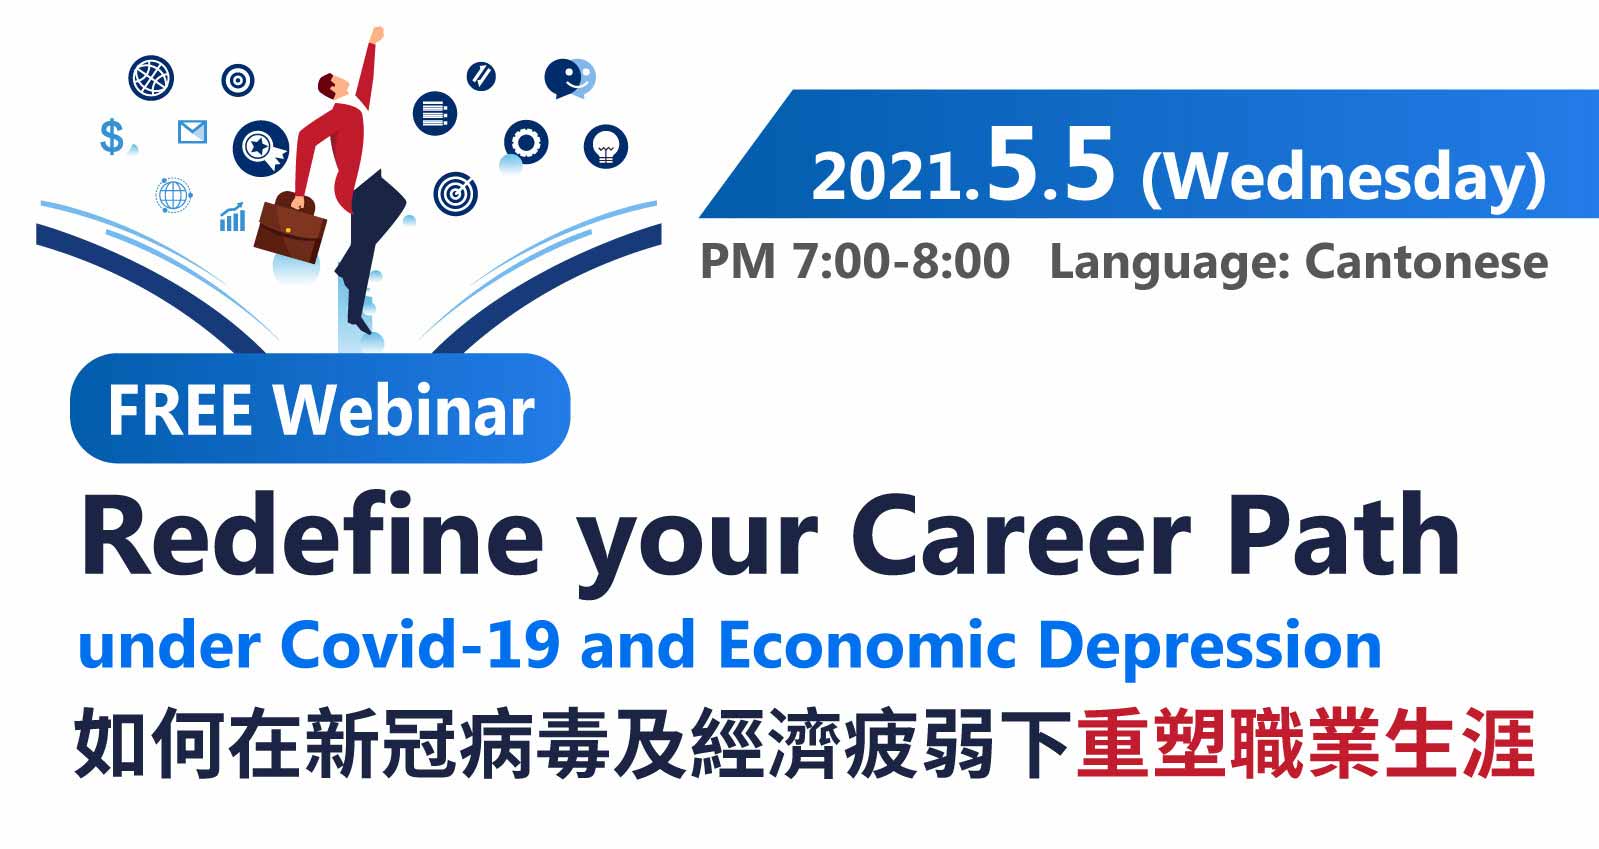 Webinar about how to redefine your career after Covid-19